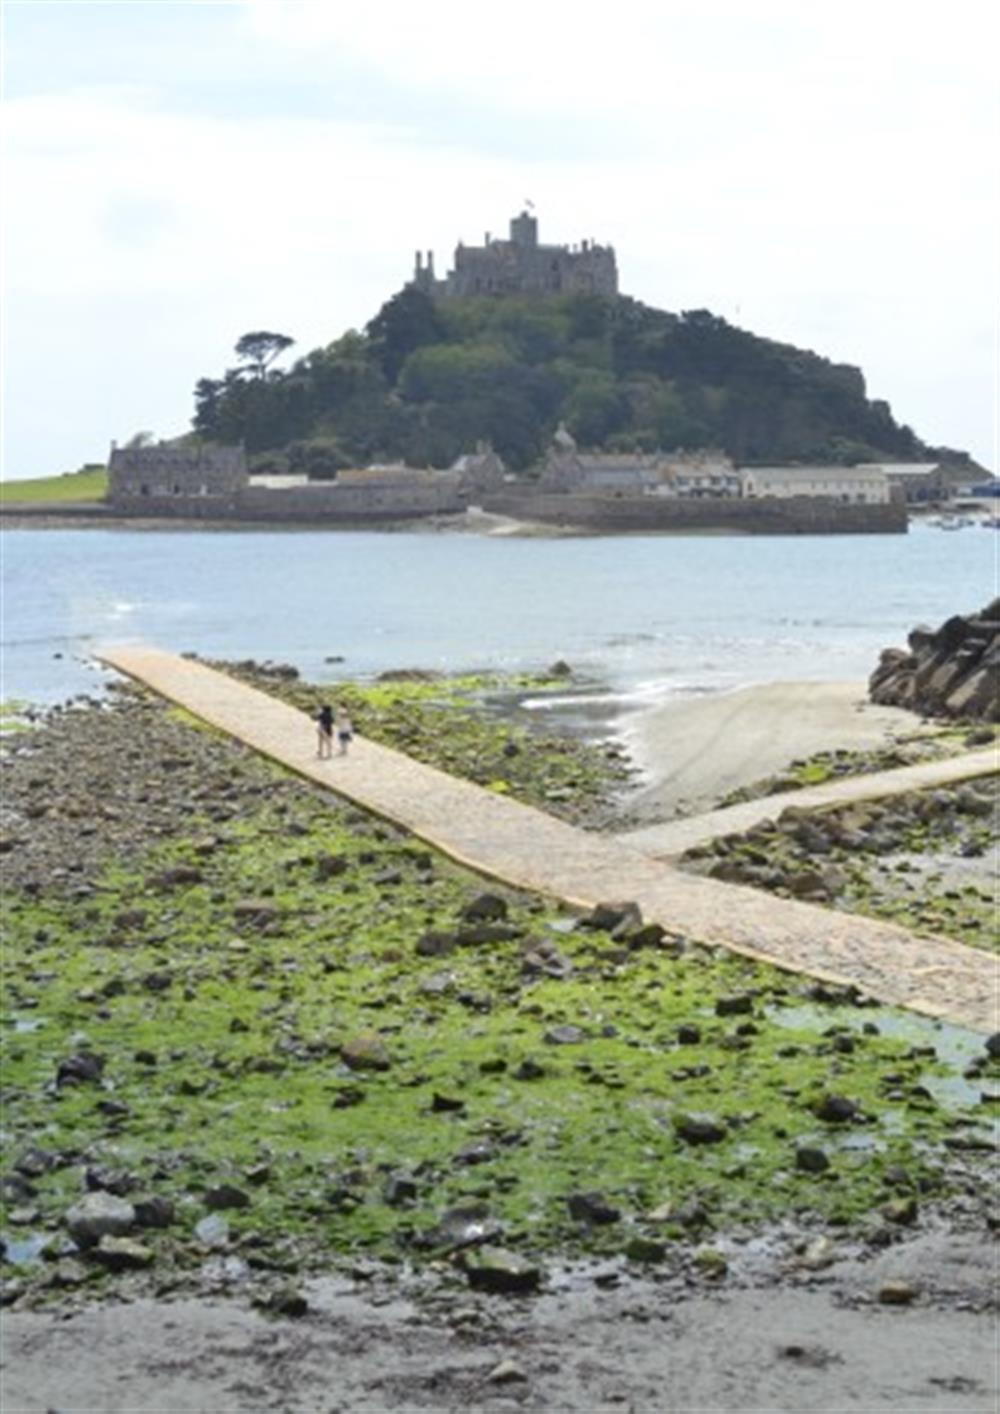 St Michael's Mount is 45 minutes away. at Mussels in Helford Passage